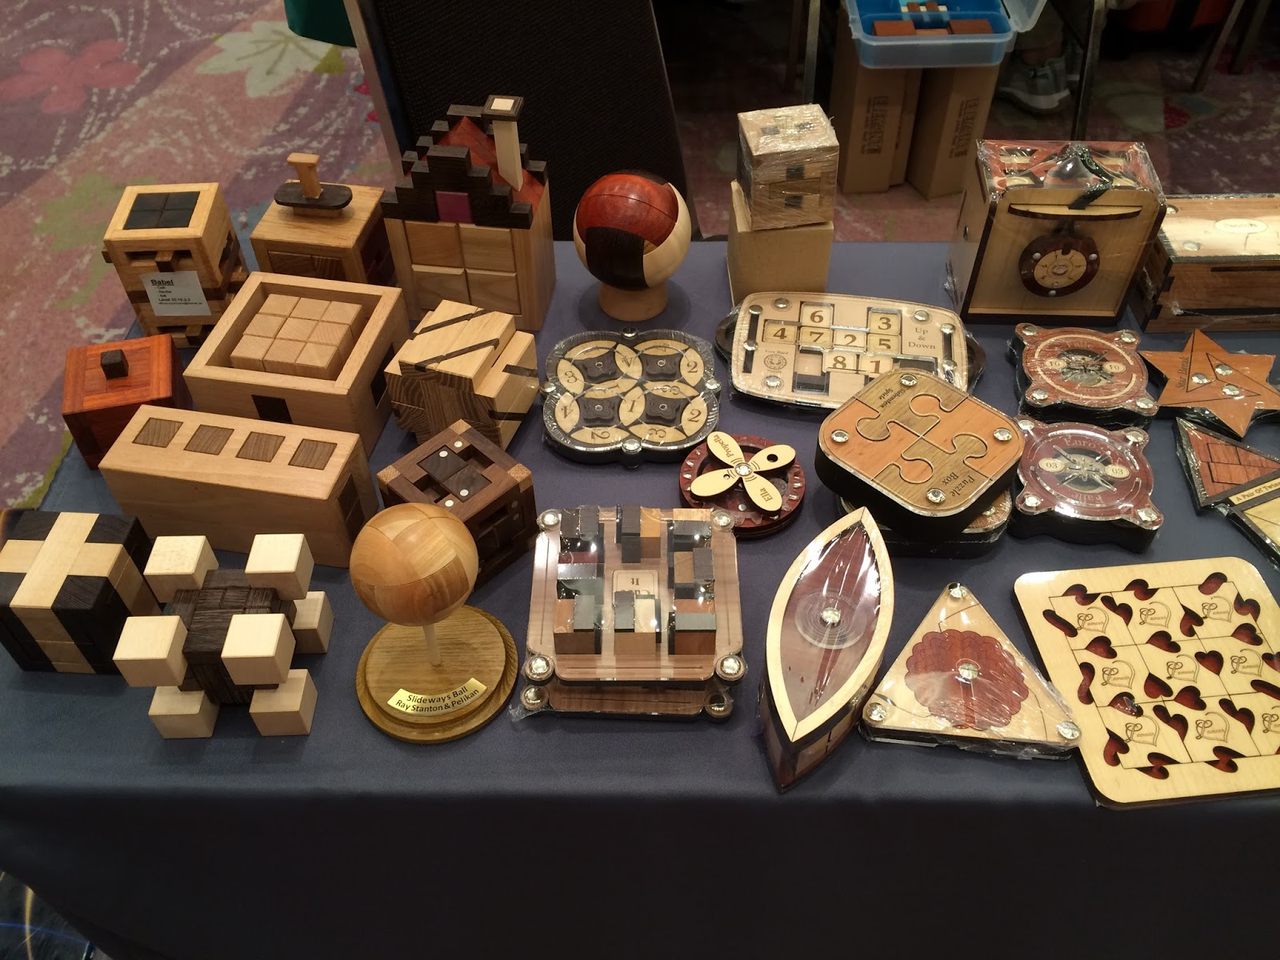 A typical table from the International Puzzle Party 2016.